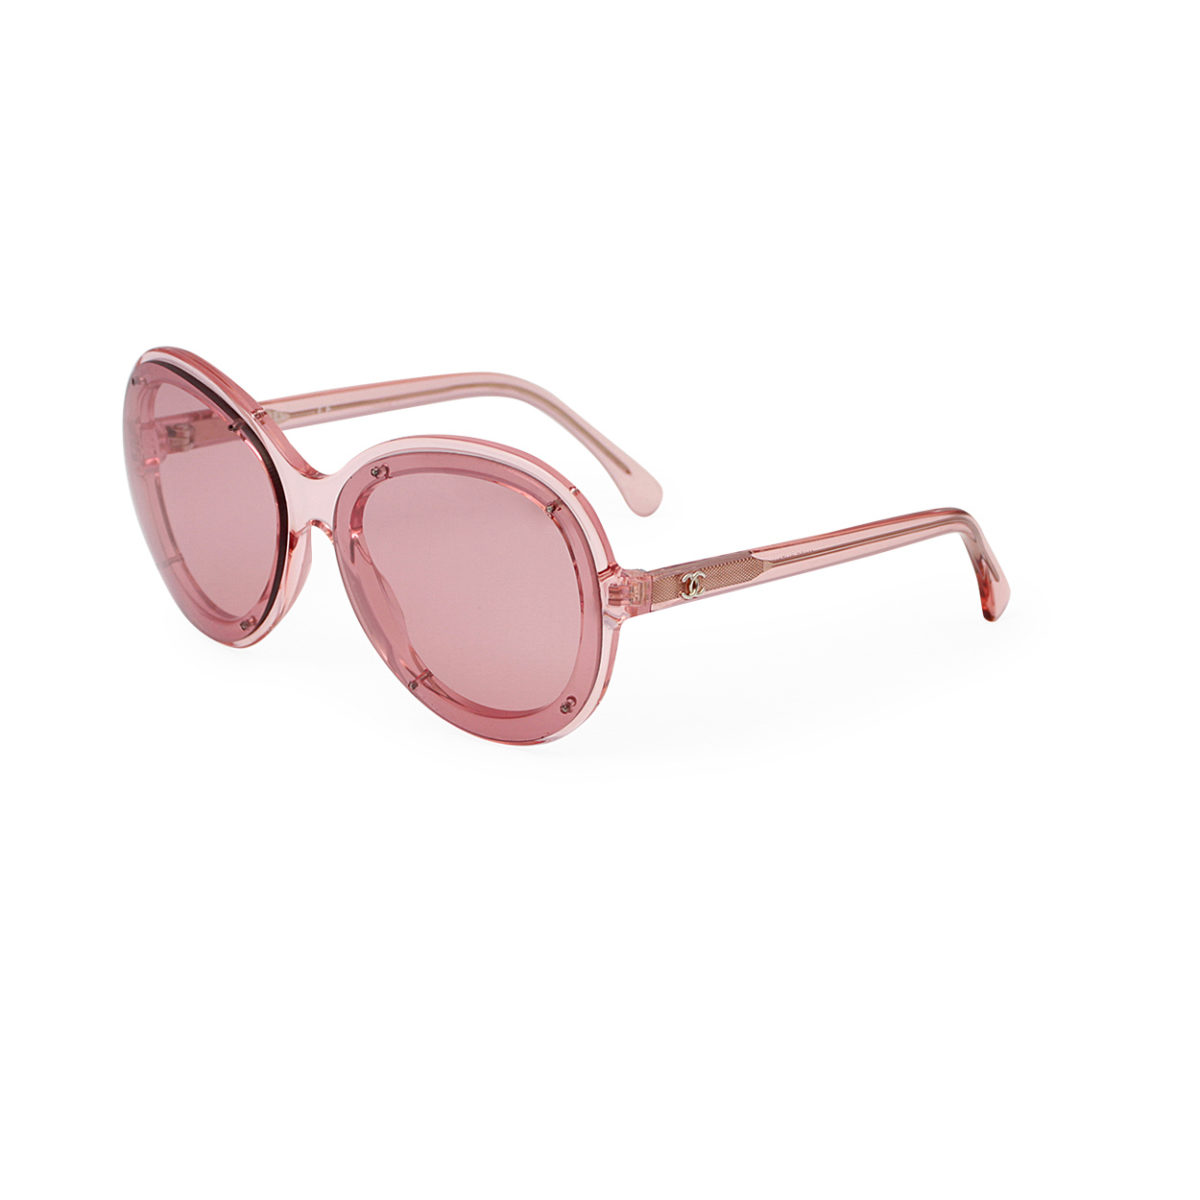 CHANEL Sunglasses 71199 S1590 Pink | Luxity